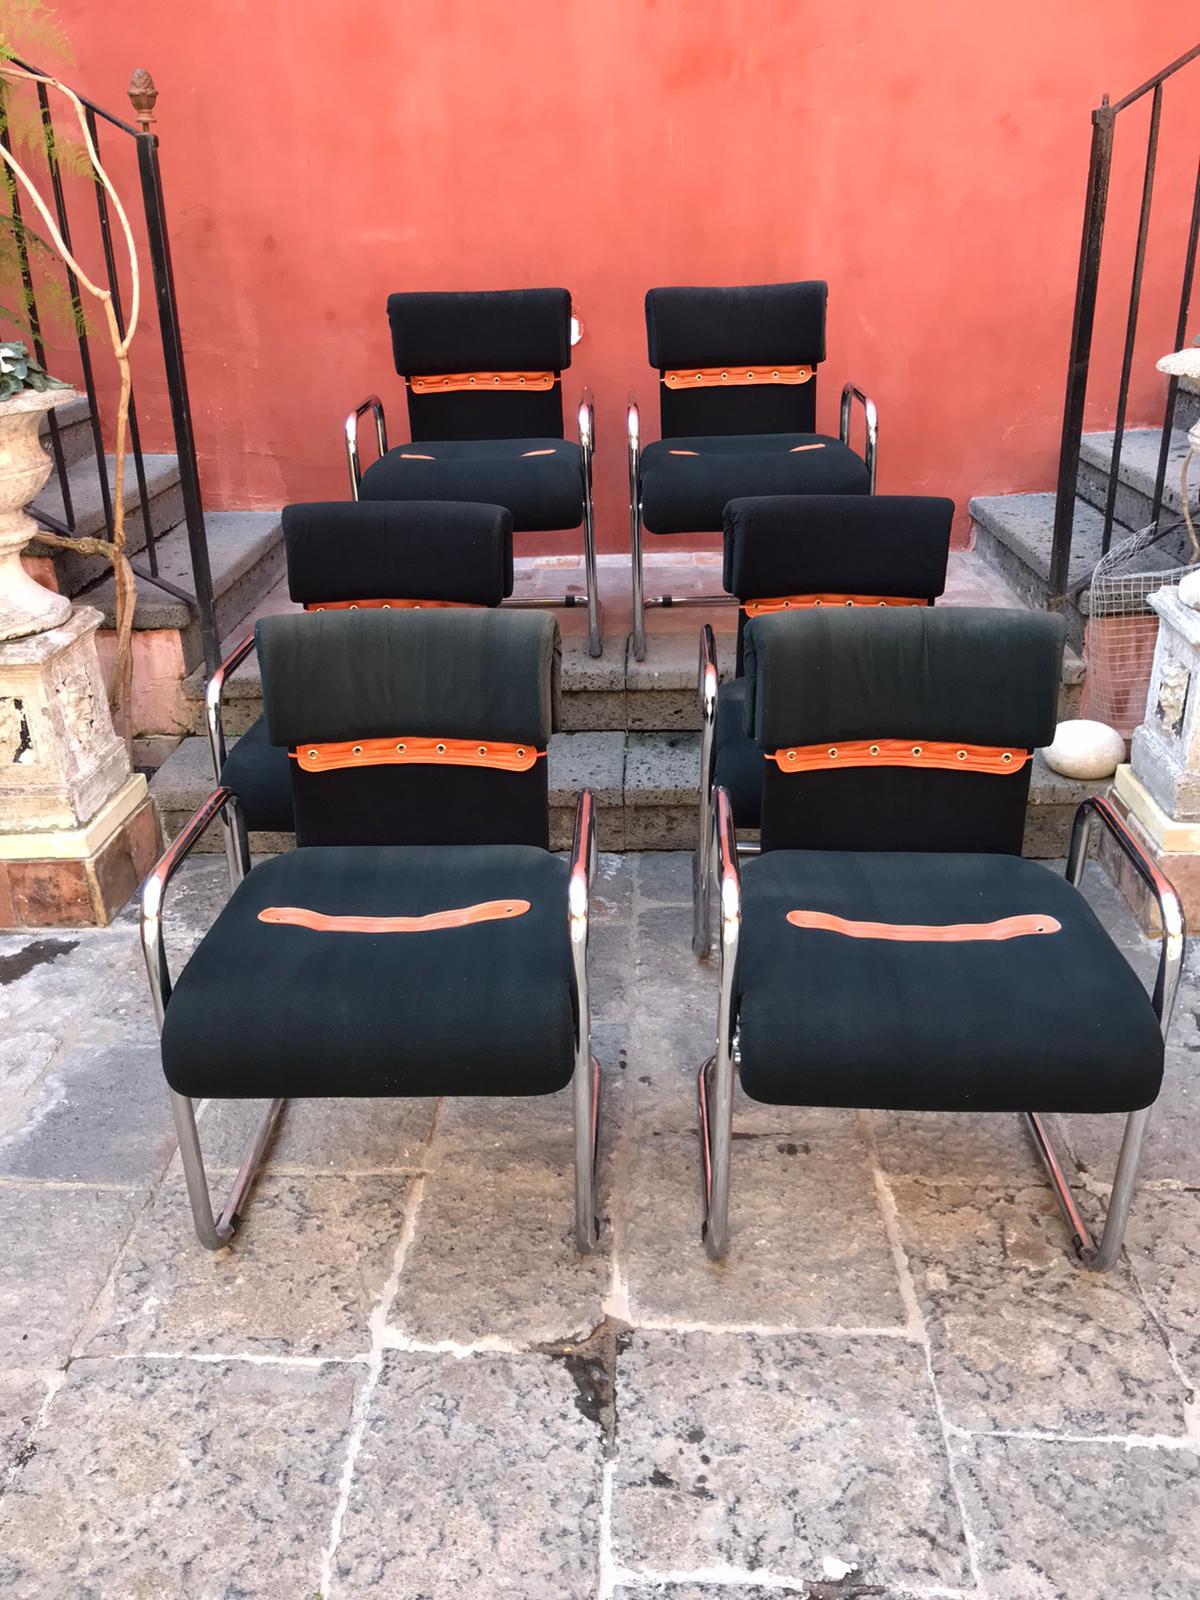 A stylish set of six chairs designed by Guido Faleschini for Mariani are an iconic 1970s vintage seats.
Sleek lightweight chromed tubular steel frame and black colour  fabric  with braided detailing on the backrests and seats. 
They are in very good